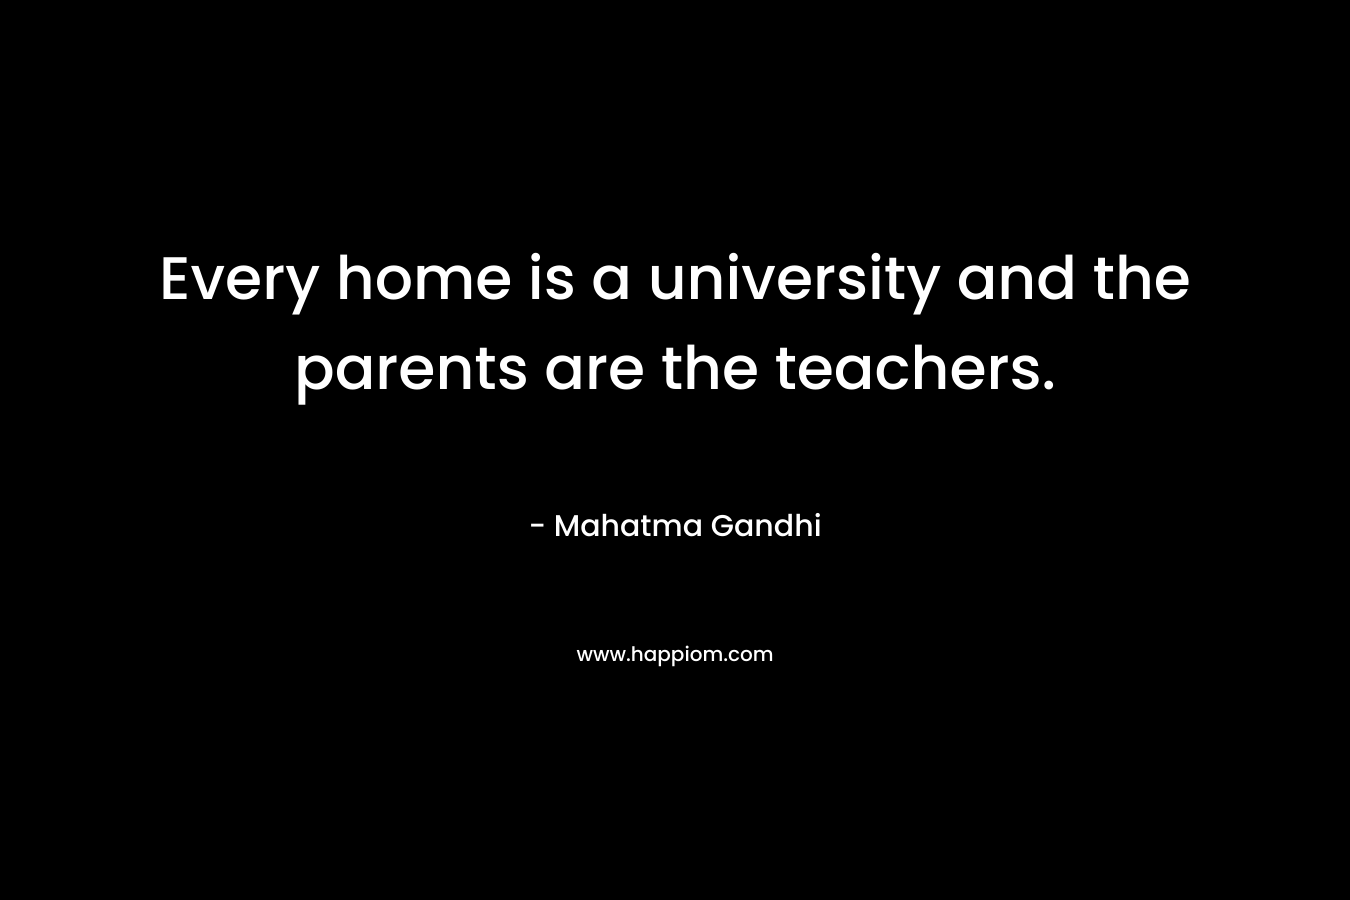 Every home is a university and the parents are the teachers. – Mahatma Gandhi